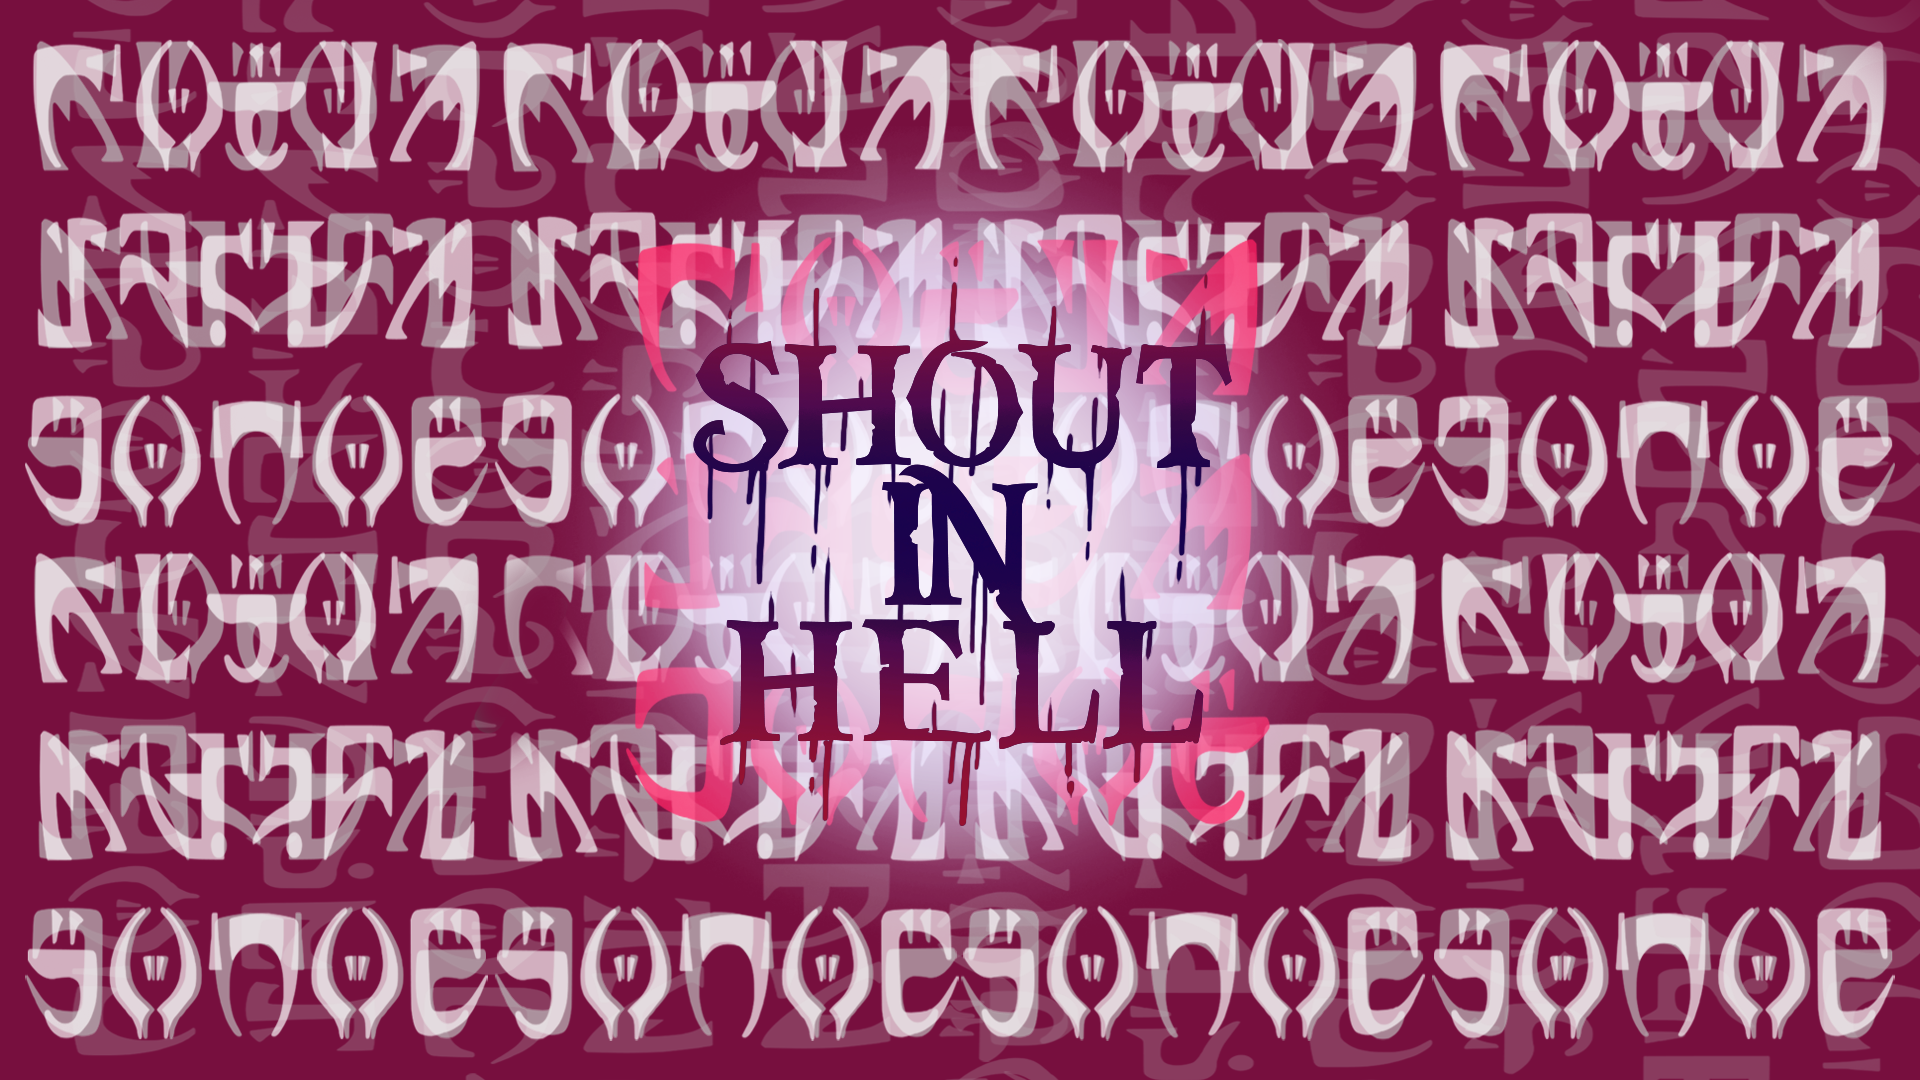 Shout in Hell